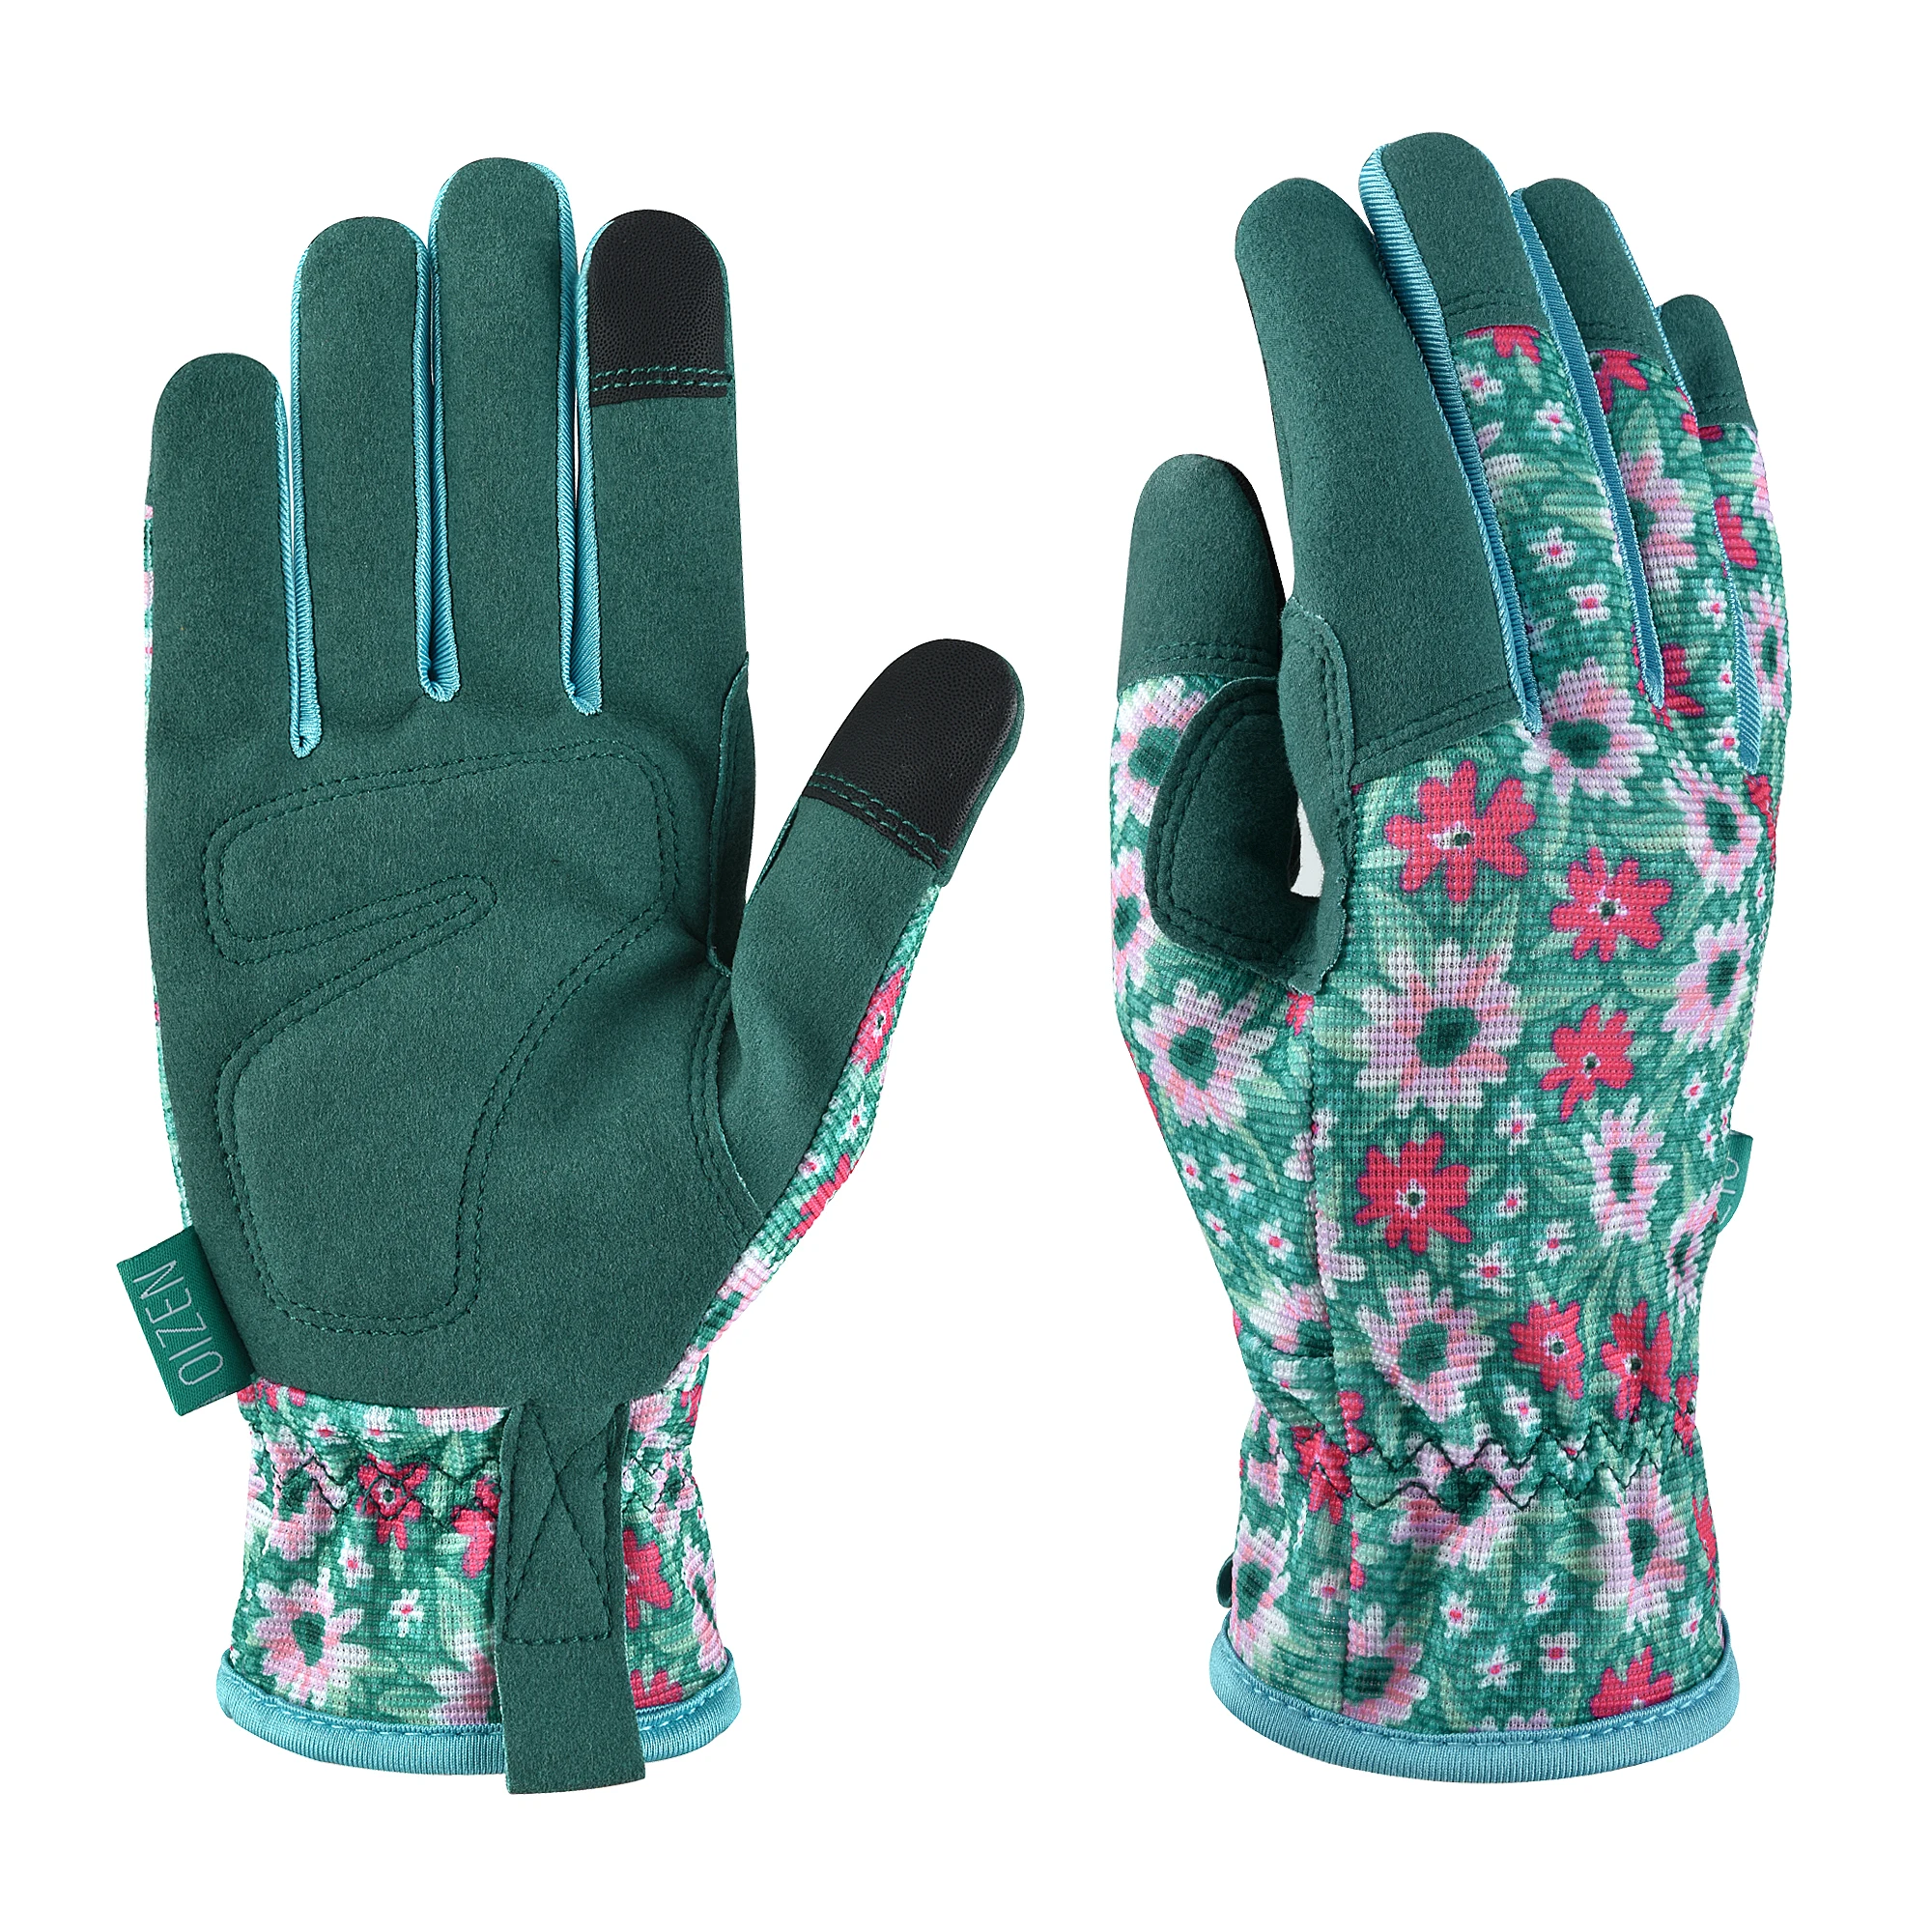 

1Pair Garden Gloves for Weeding Working Digging Planting Gardening Gloves for Women light duty Breathable Touchscreen